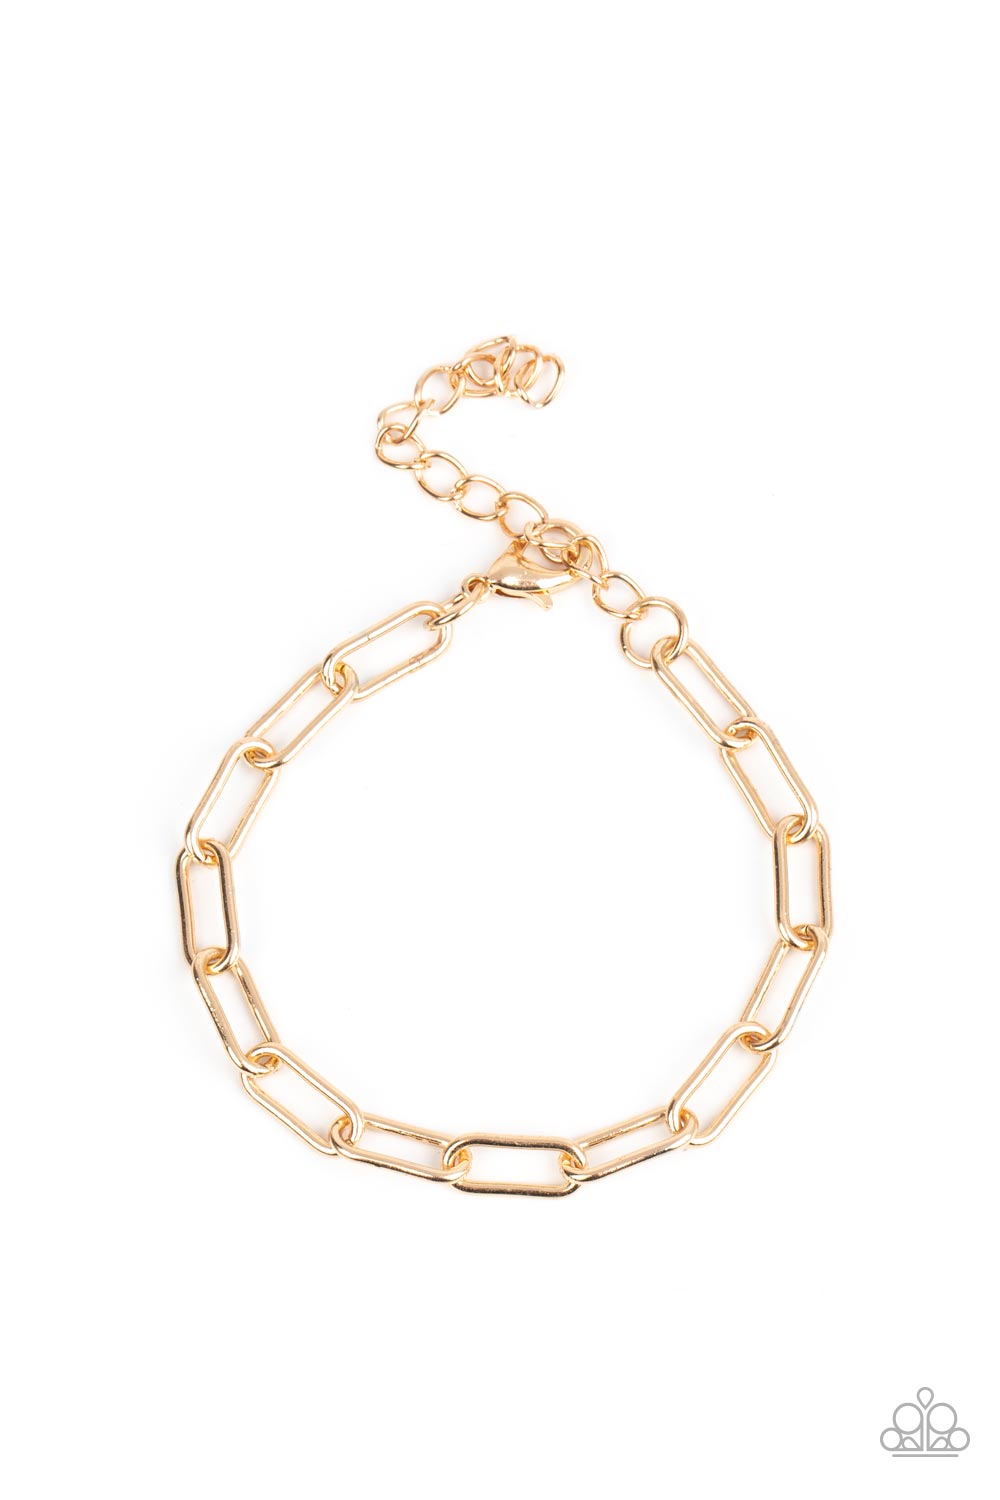 Paparazzi Accessories Tailgate Party - Gold An oversized collection of gold oblong links interlock around the wrist for a casual hint of shimmer. Features an adjustable clasp closure. Sold as one individual bracelet. Jewelry